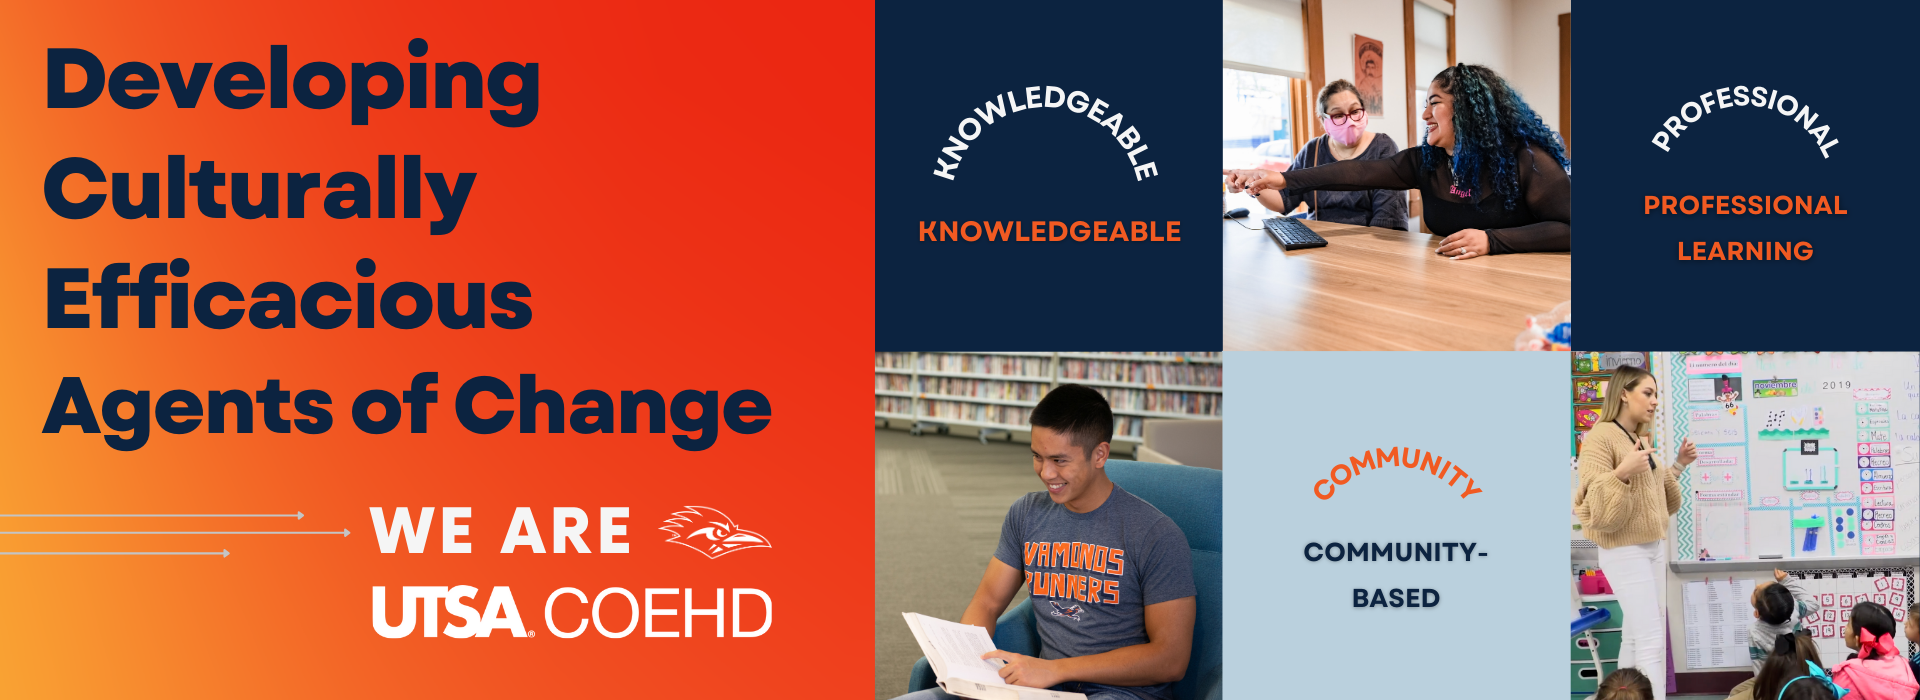 Developing Culturally Efficacious  Agents of Change. We are UTSA COEHD!